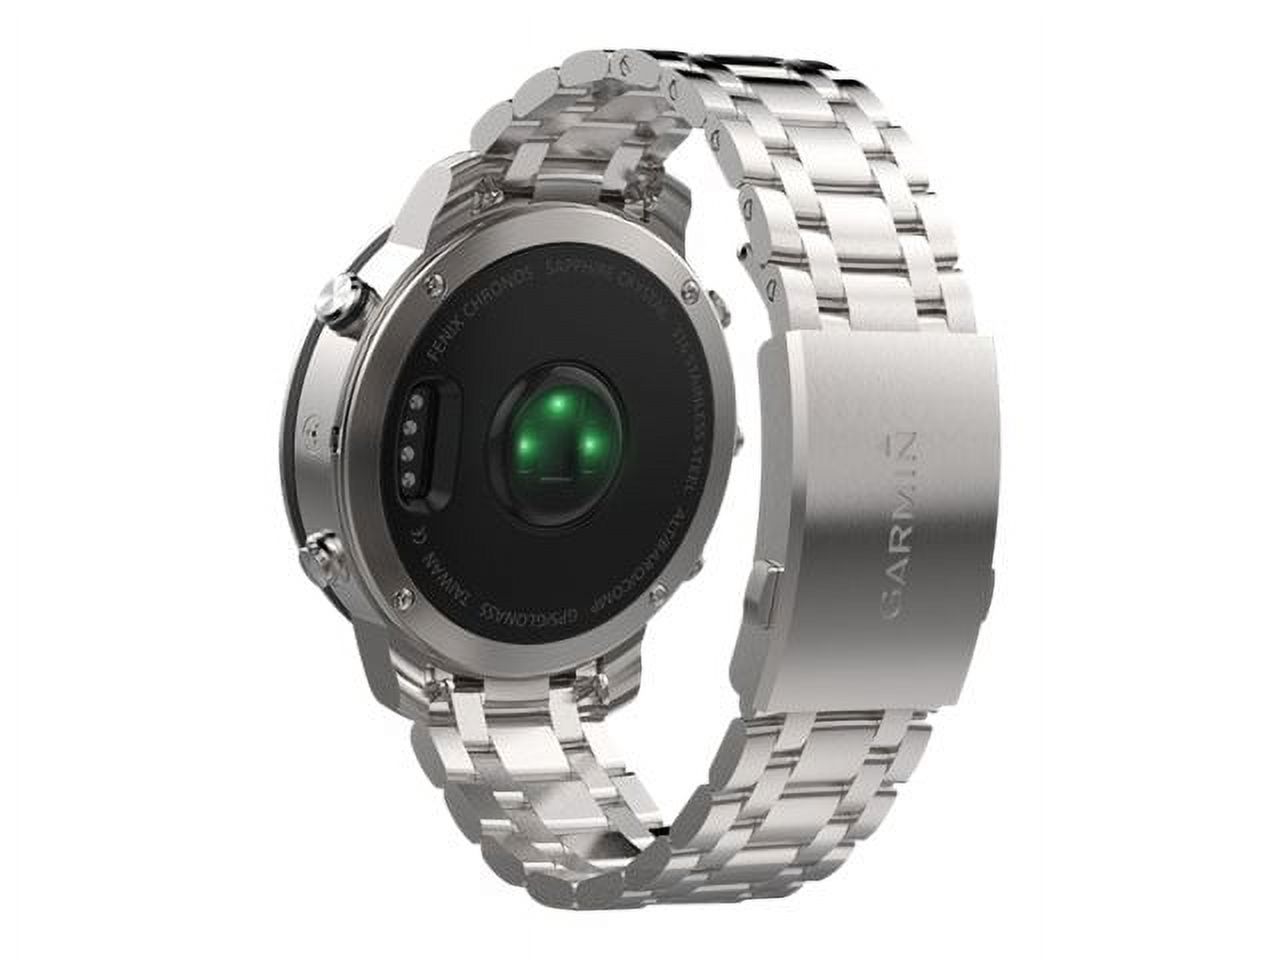 Fenix Chronos GPS Multi Sport Smart Fitness Brushed Stainless Steel Watch - image 3 of 4